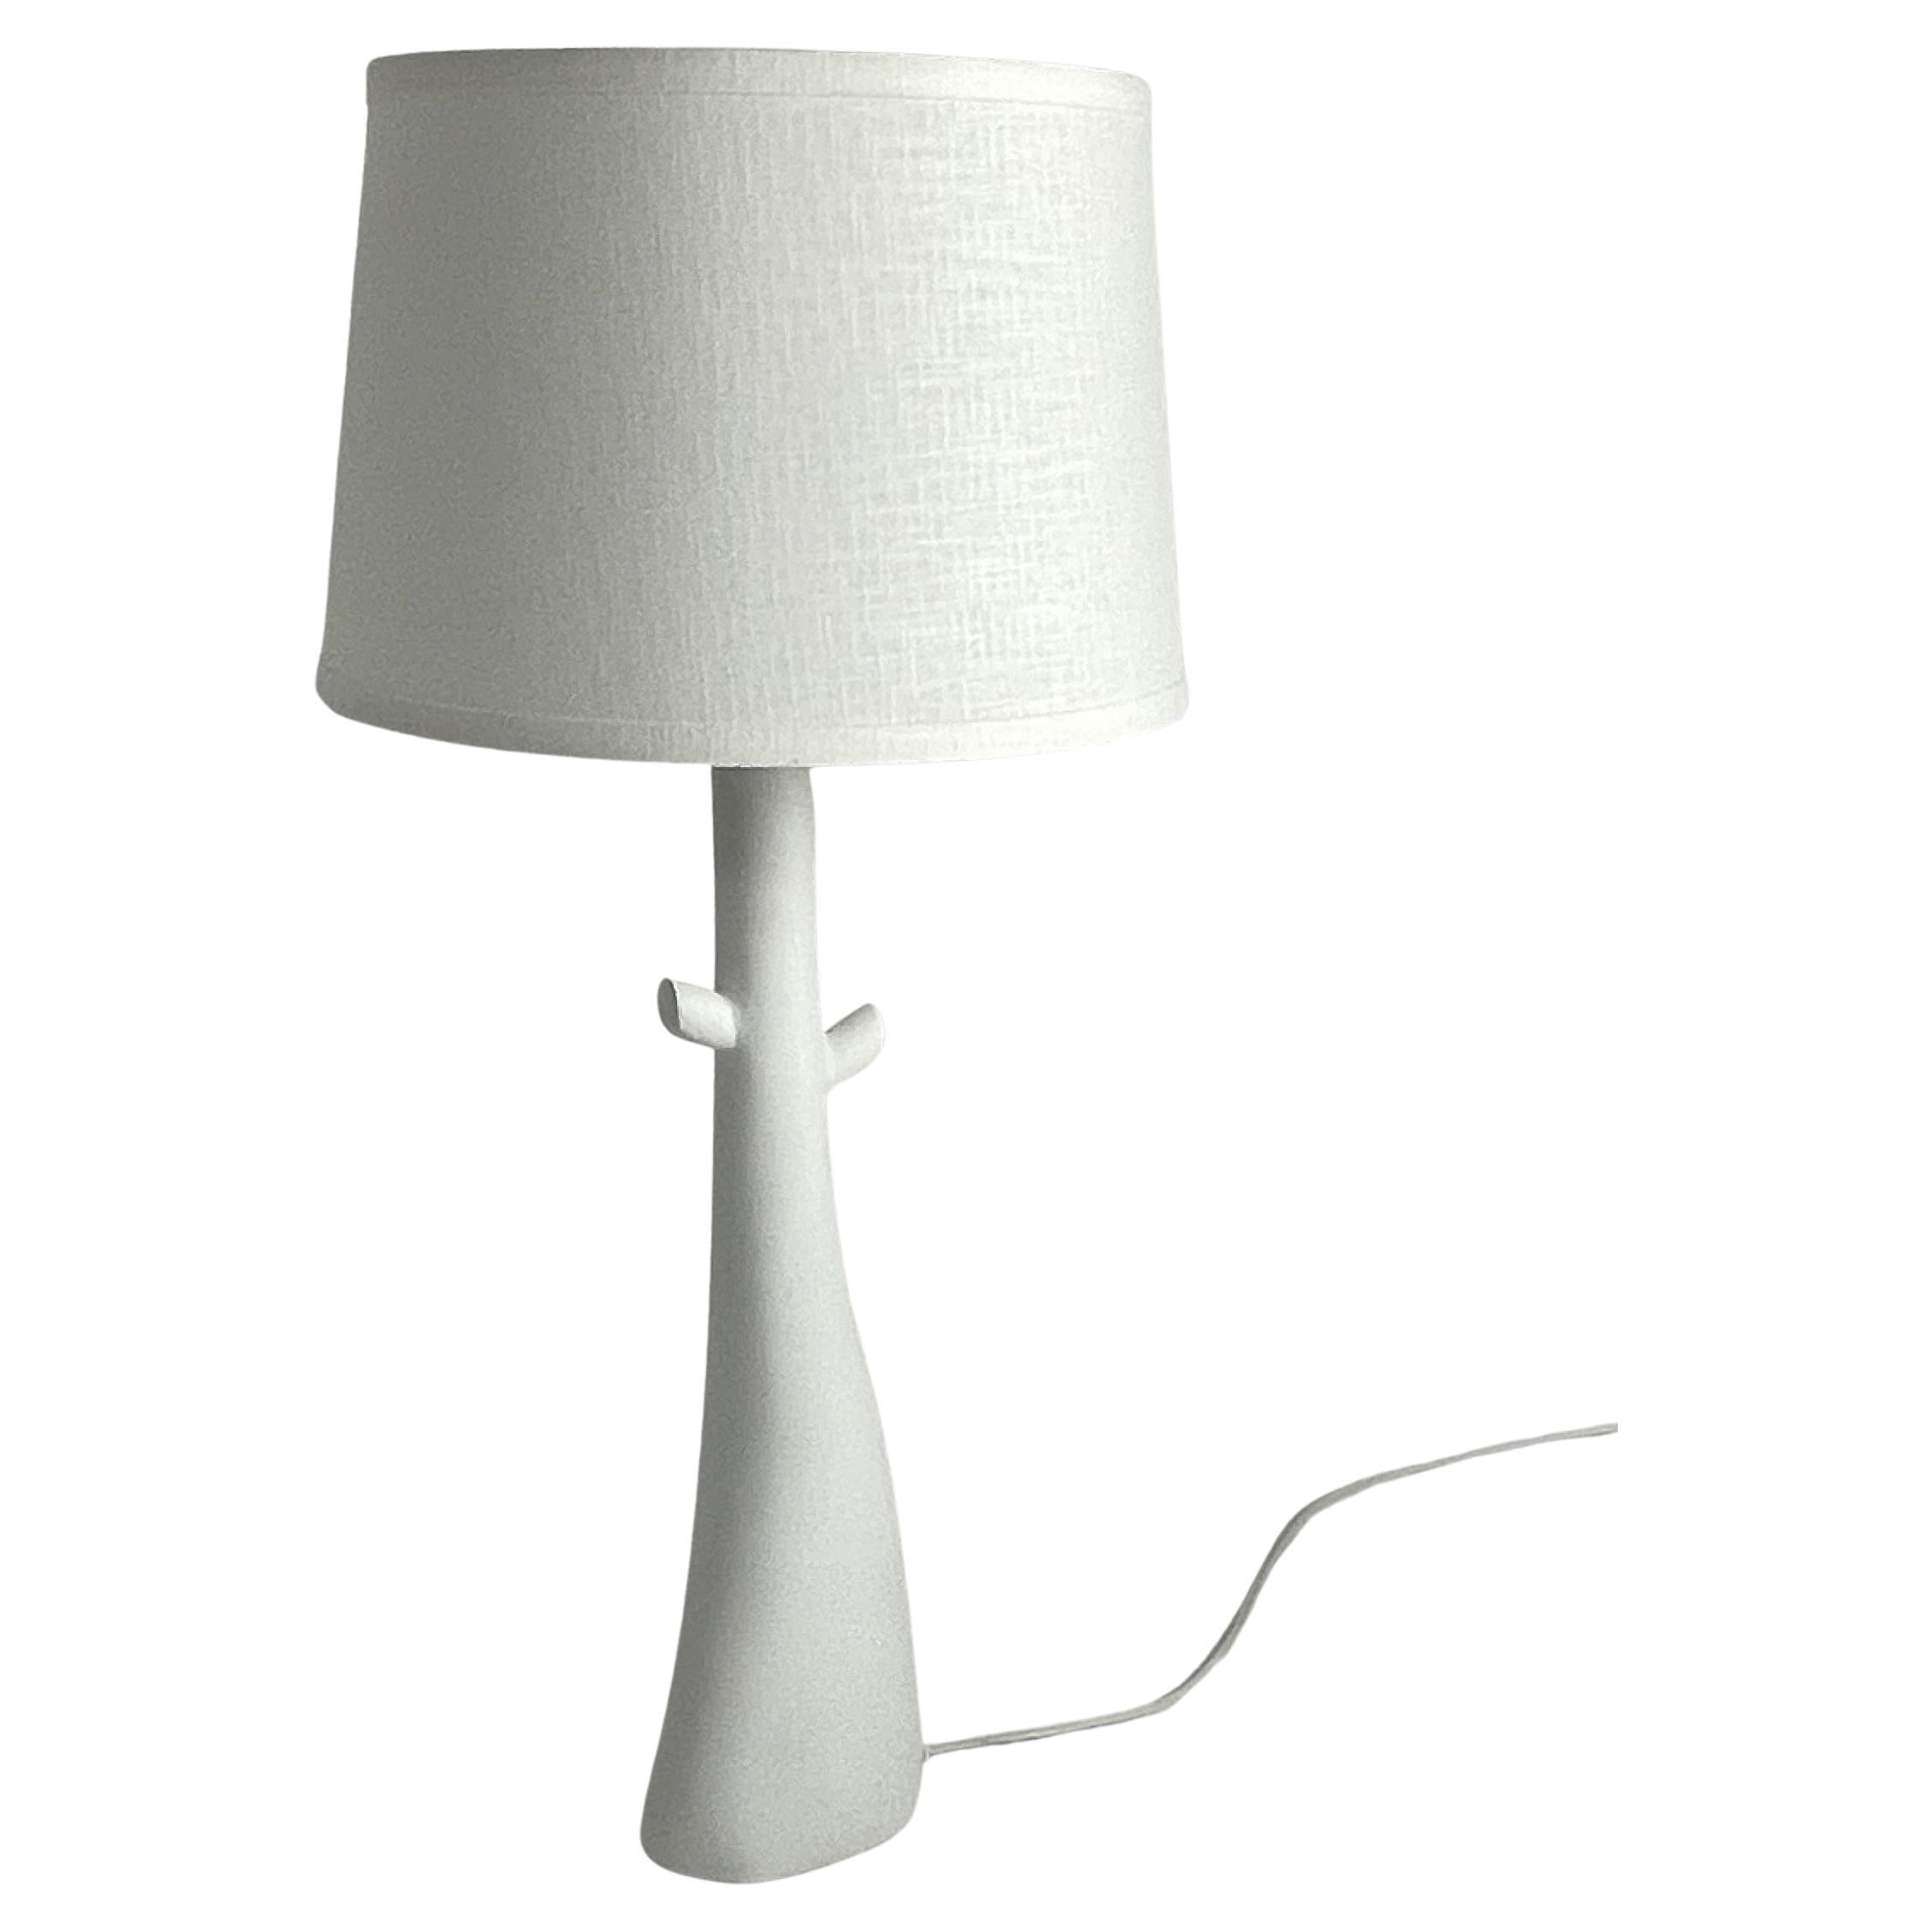 Plaster of Paris handcrafted table lamp with a tree shaped design. Linen shade and nickel-plated hardware. Light uses on medium based three-way bulb. Shade size is 10